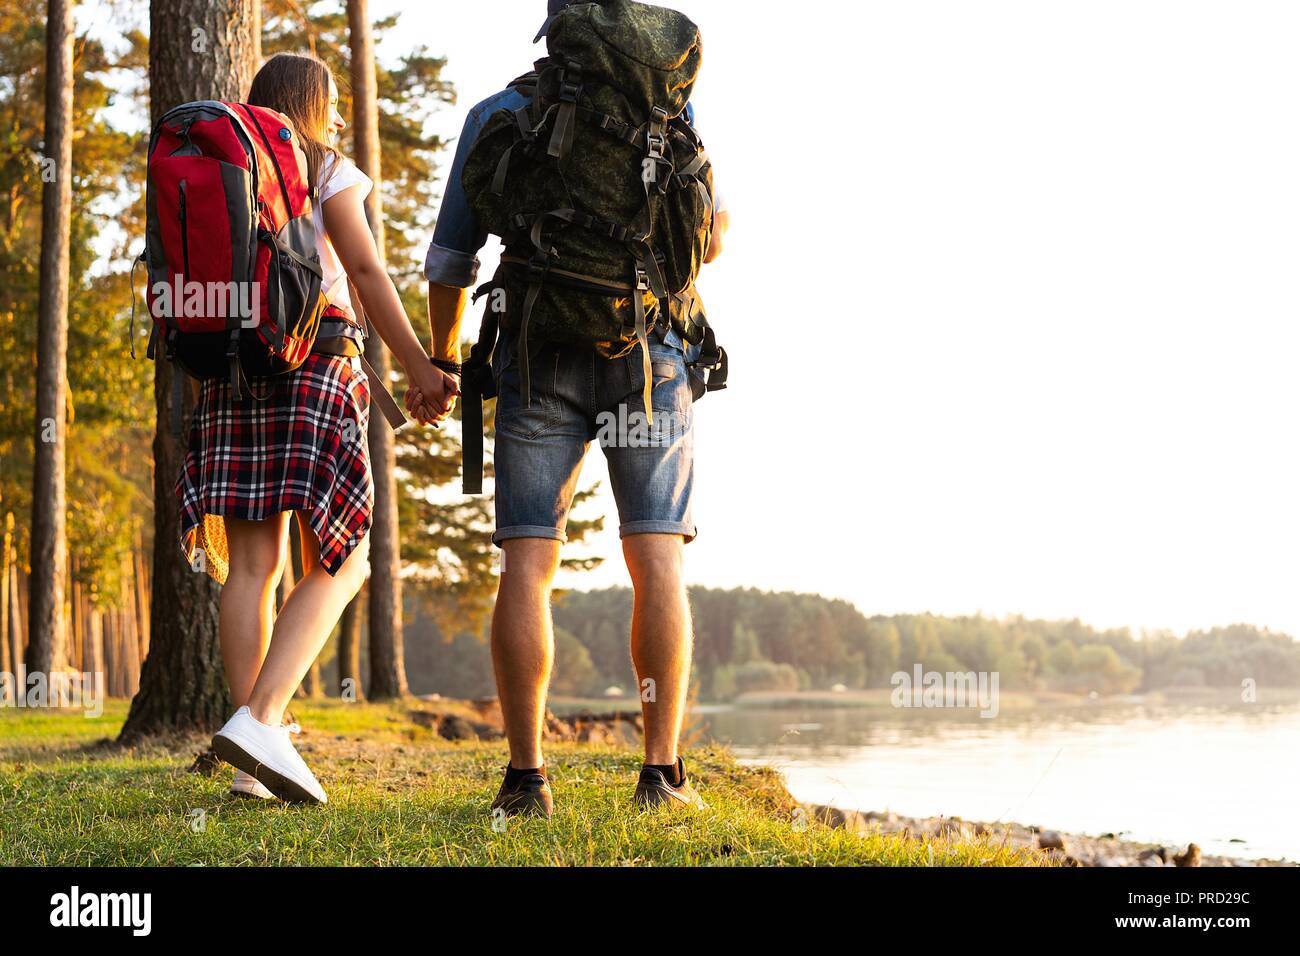 Tough route. Beautiful young couple hiking together in the woods while enjoying their journey. Stock Photo